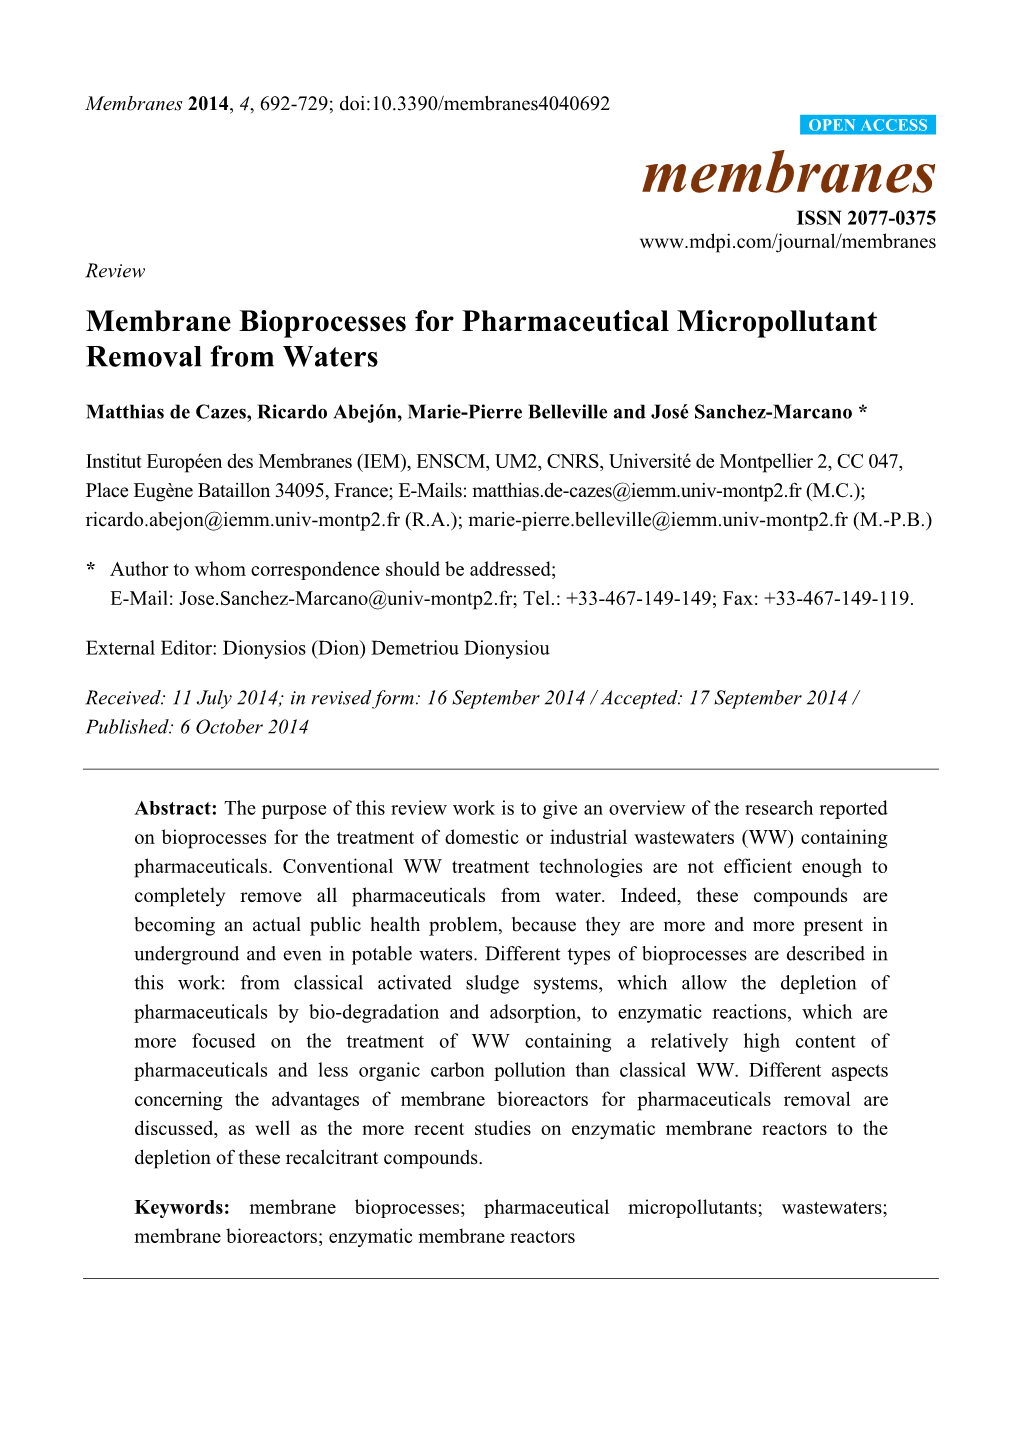 Membrane Bioprocesses for Pharmaceutical Micropollutant Removal from Waters